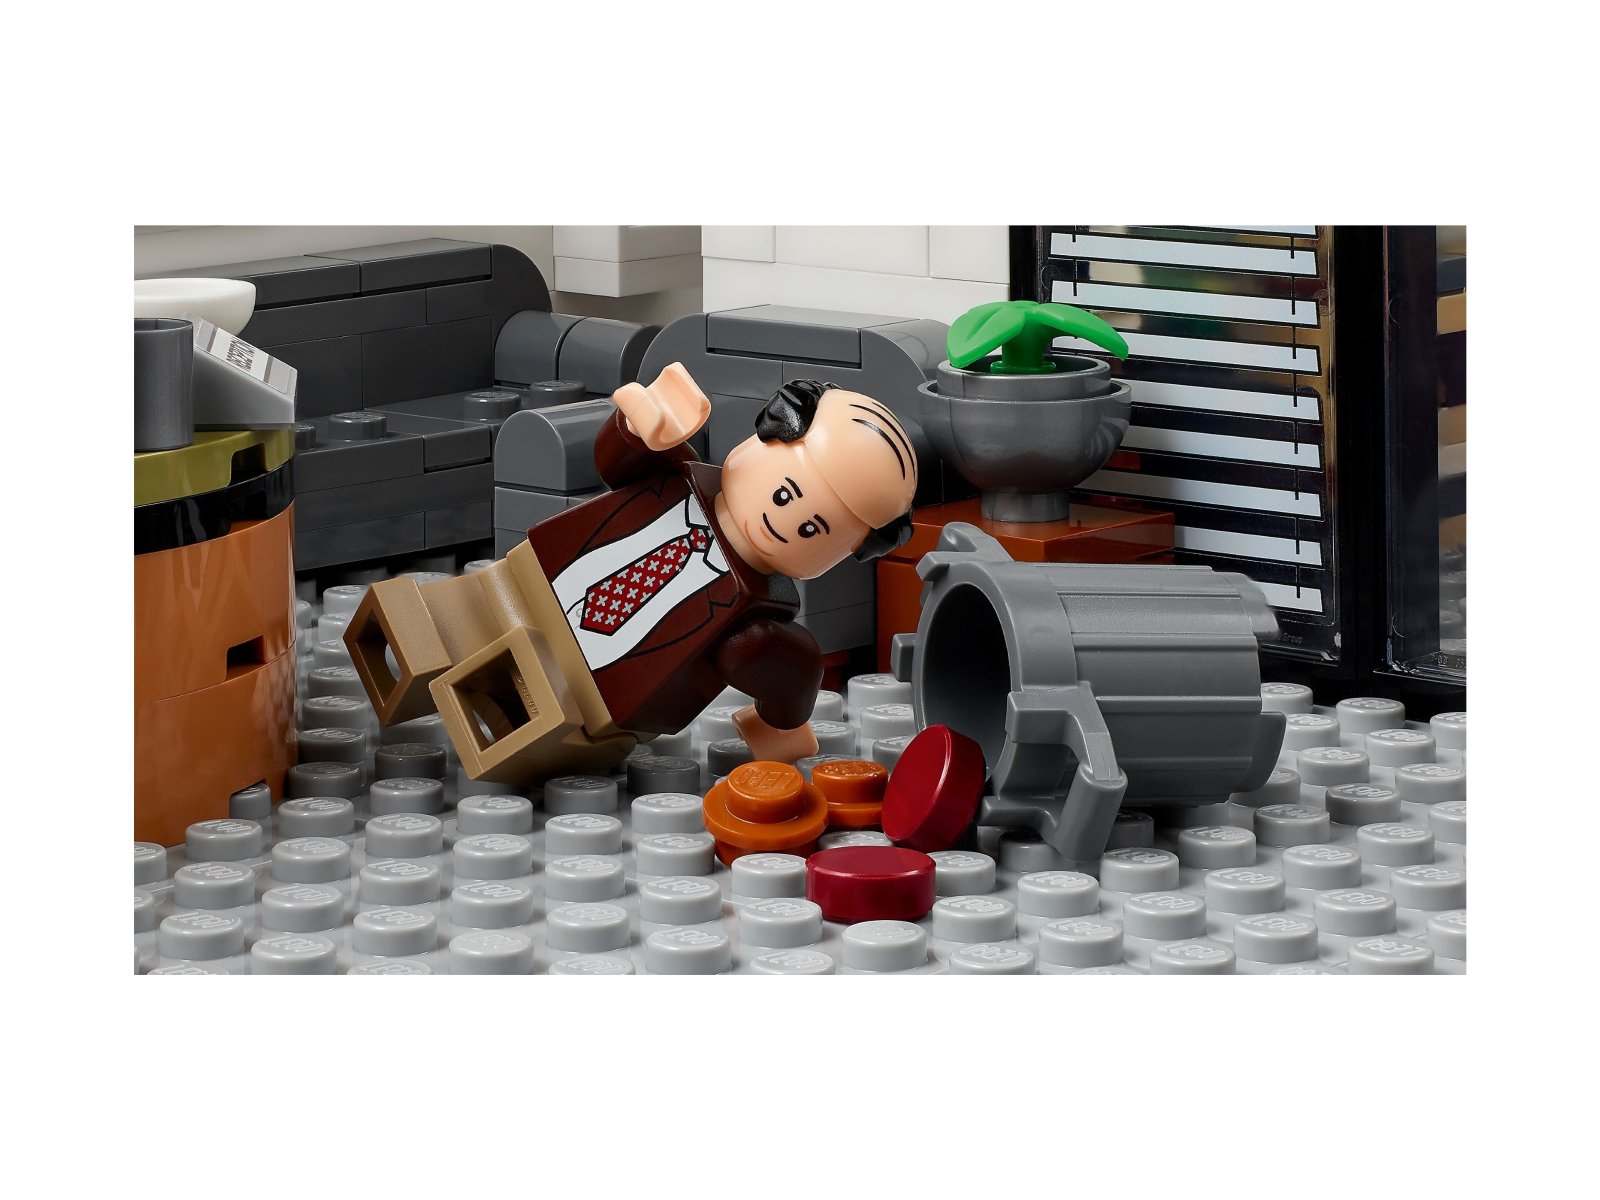 LEGO 21336 The Office